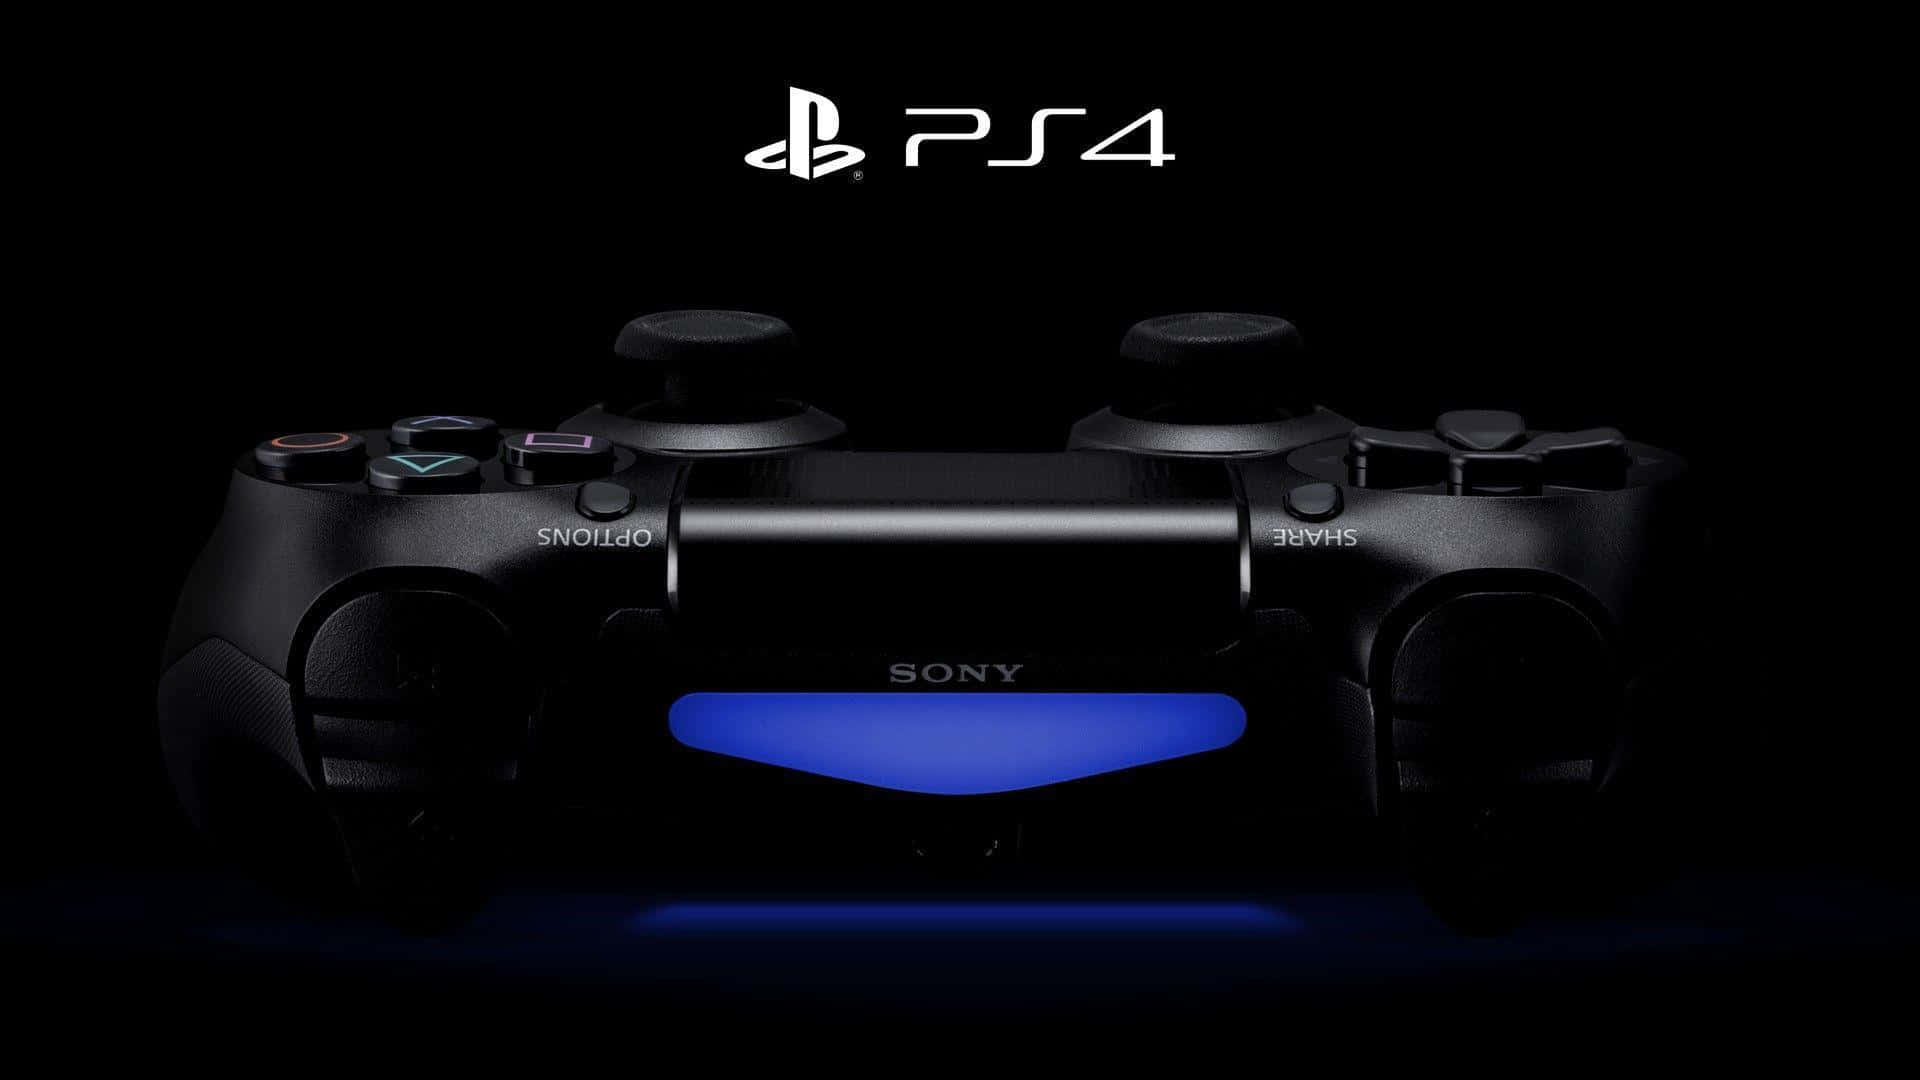 Cool Ps4 With Black Controller With Sony Logo Wallpaper